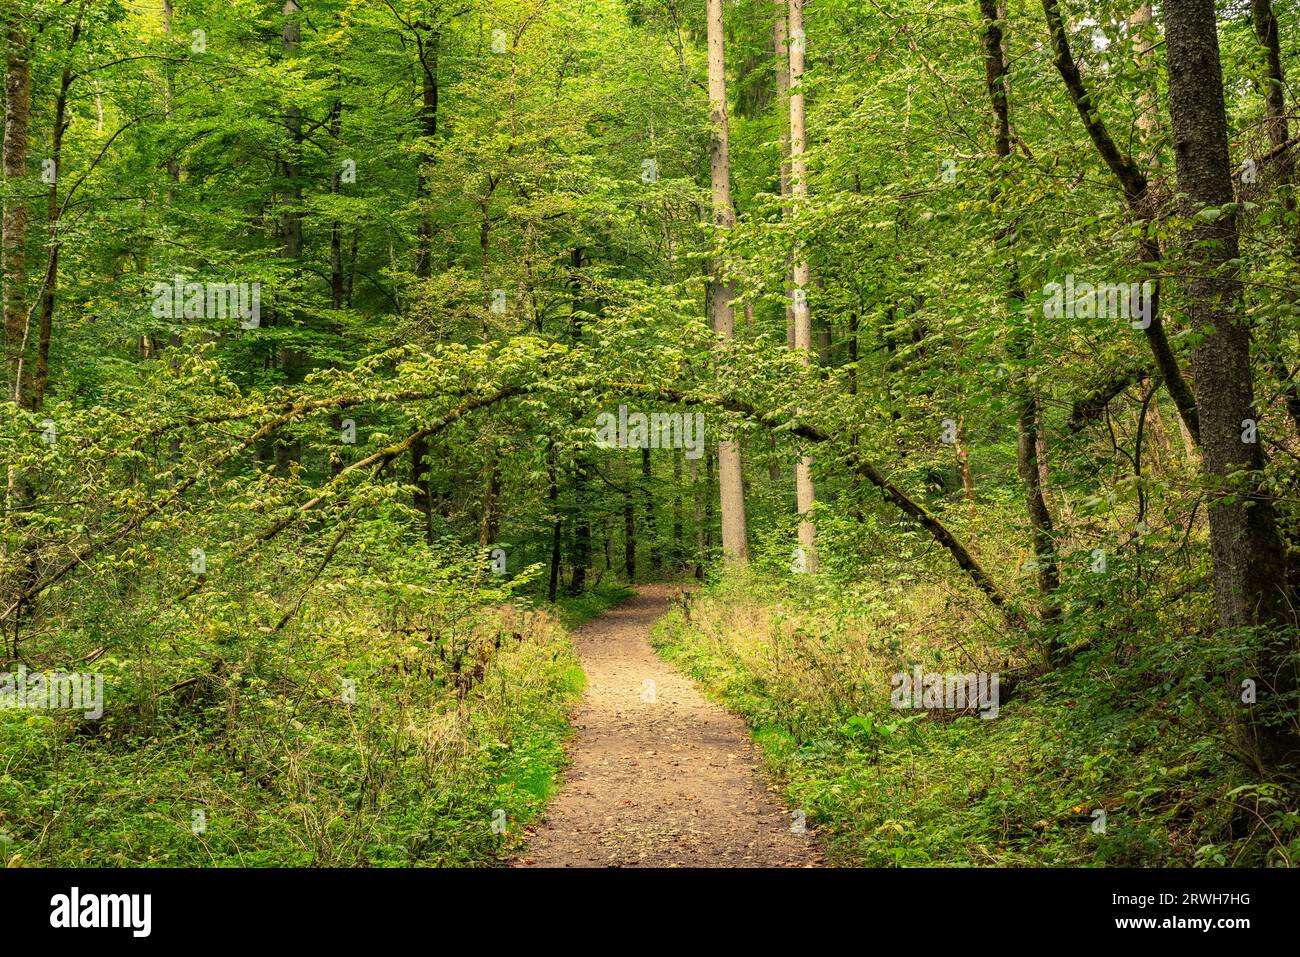 Path through the Gaulach Gorge, a gorge of the 3 Gorges Hiking Trail in the Black Forest, Germany Stock Photo